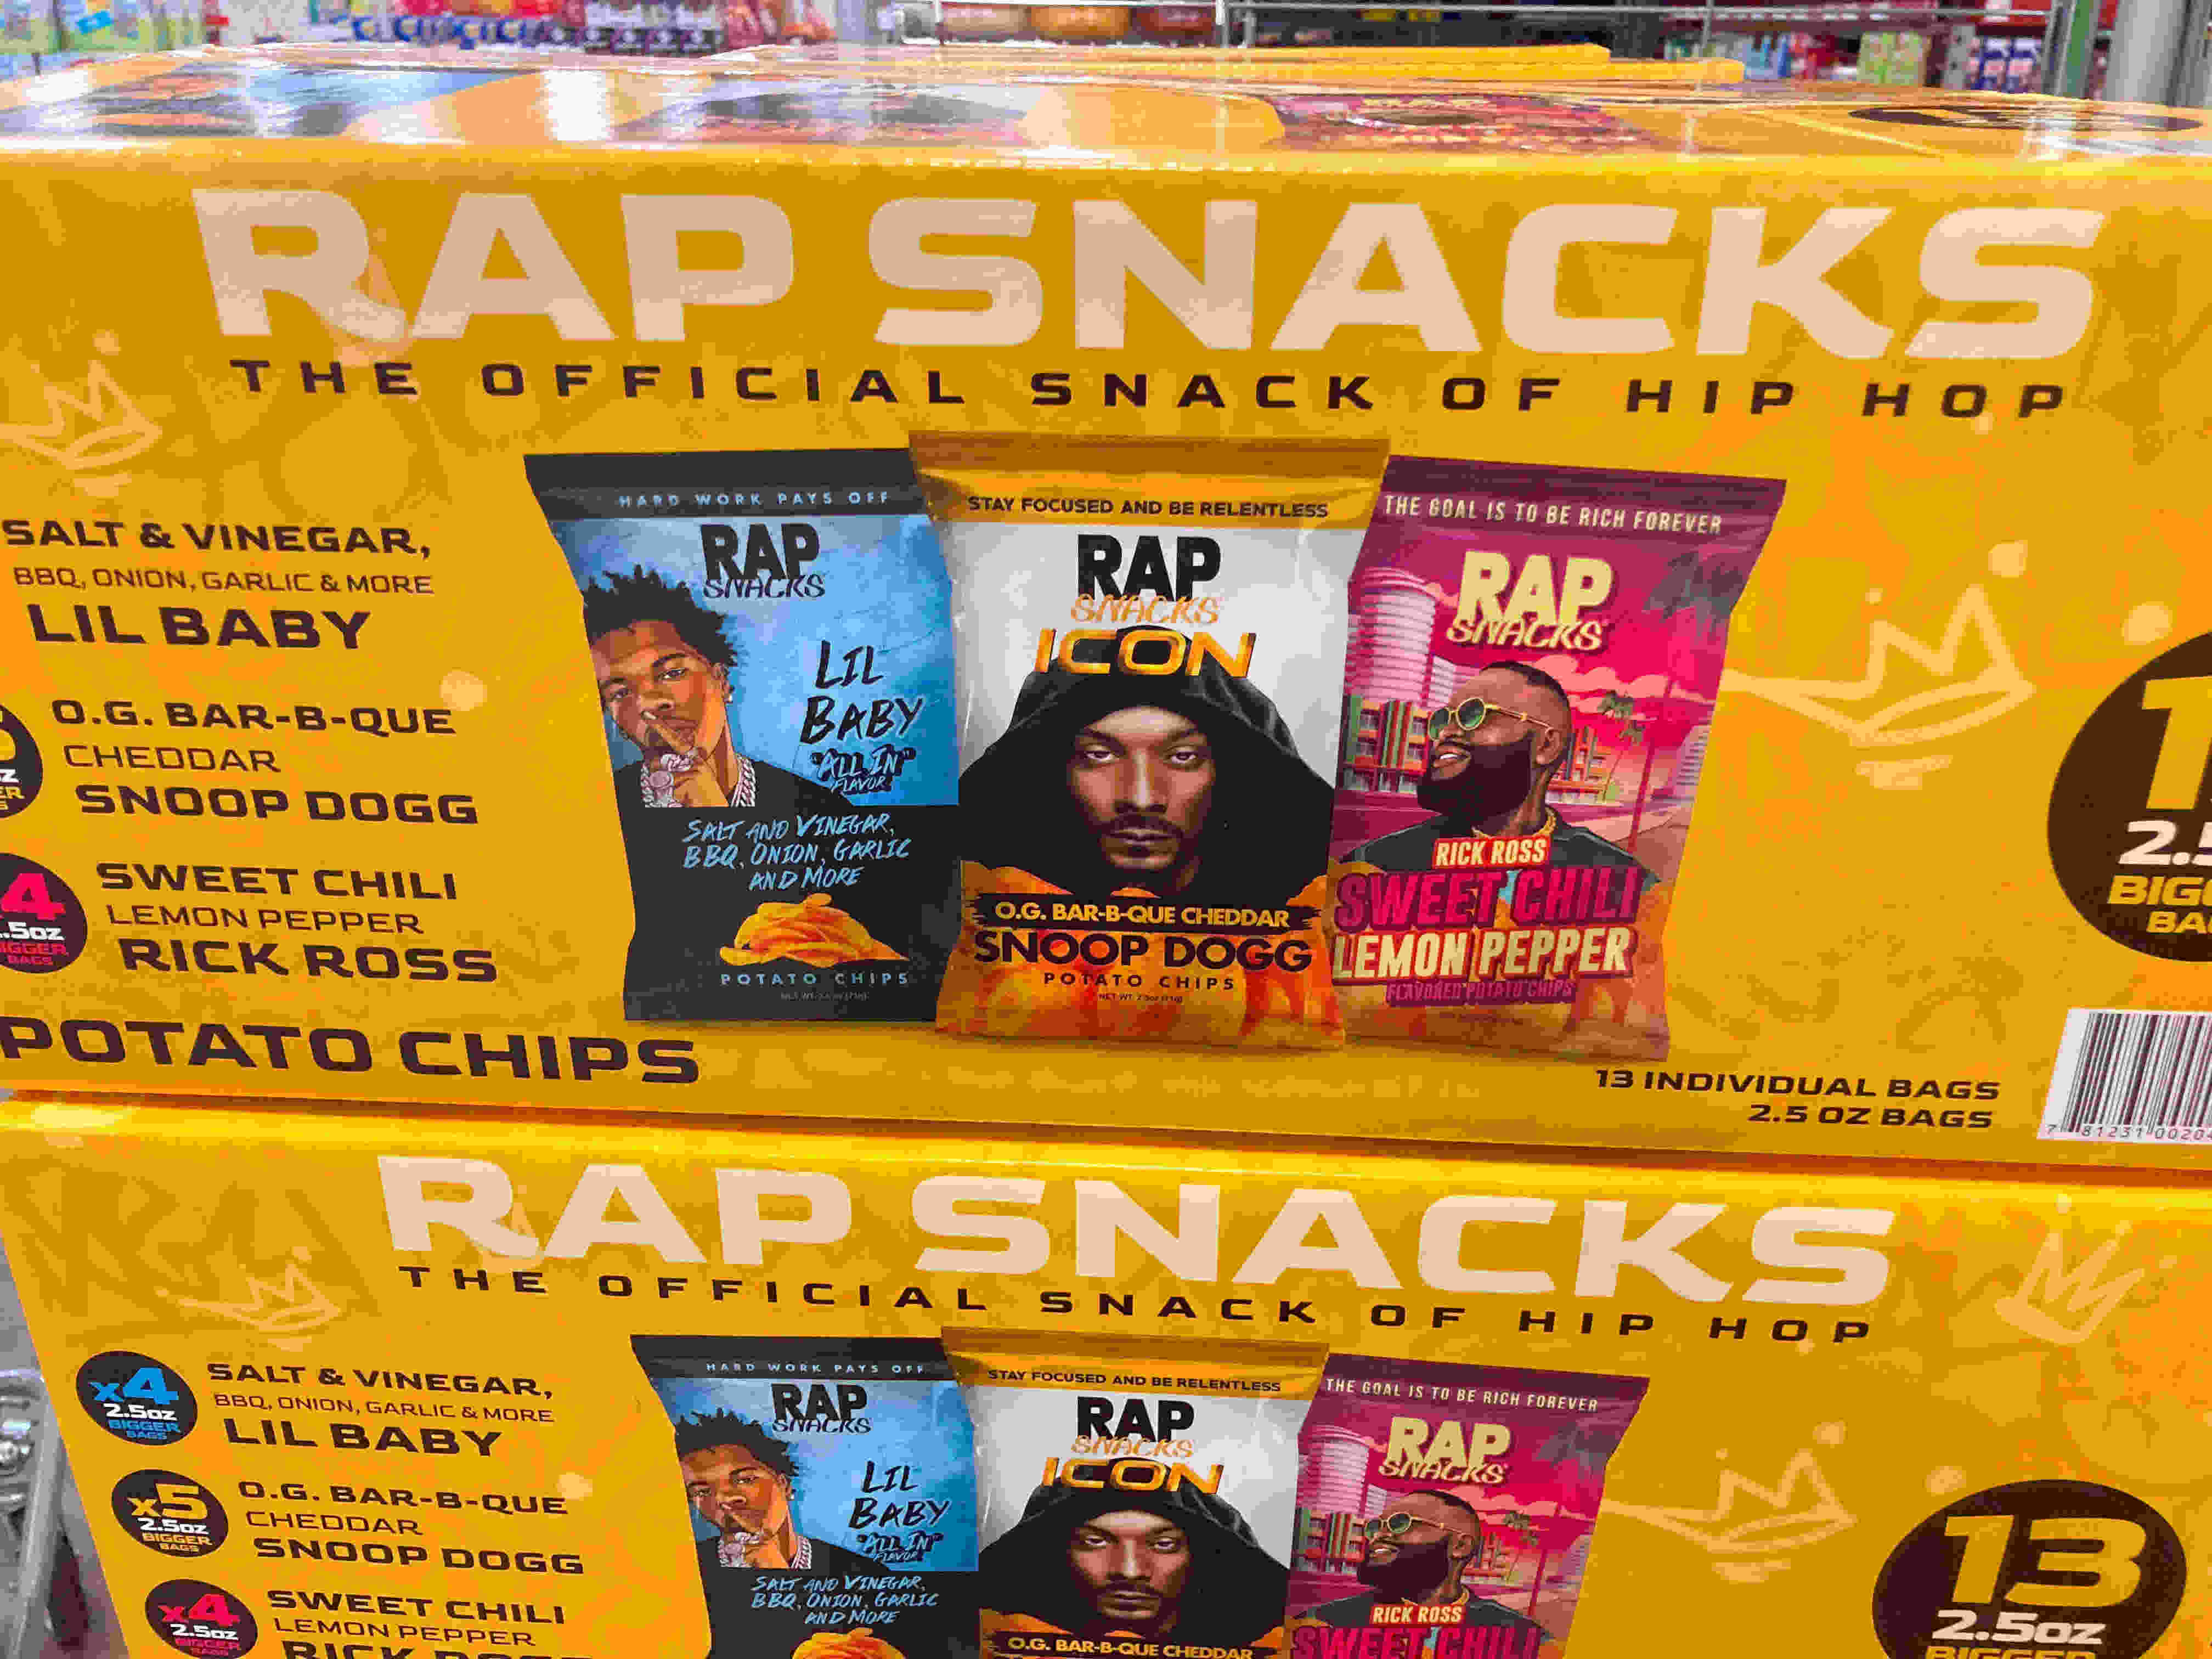 Rap Snack 1 - Snoop and Others